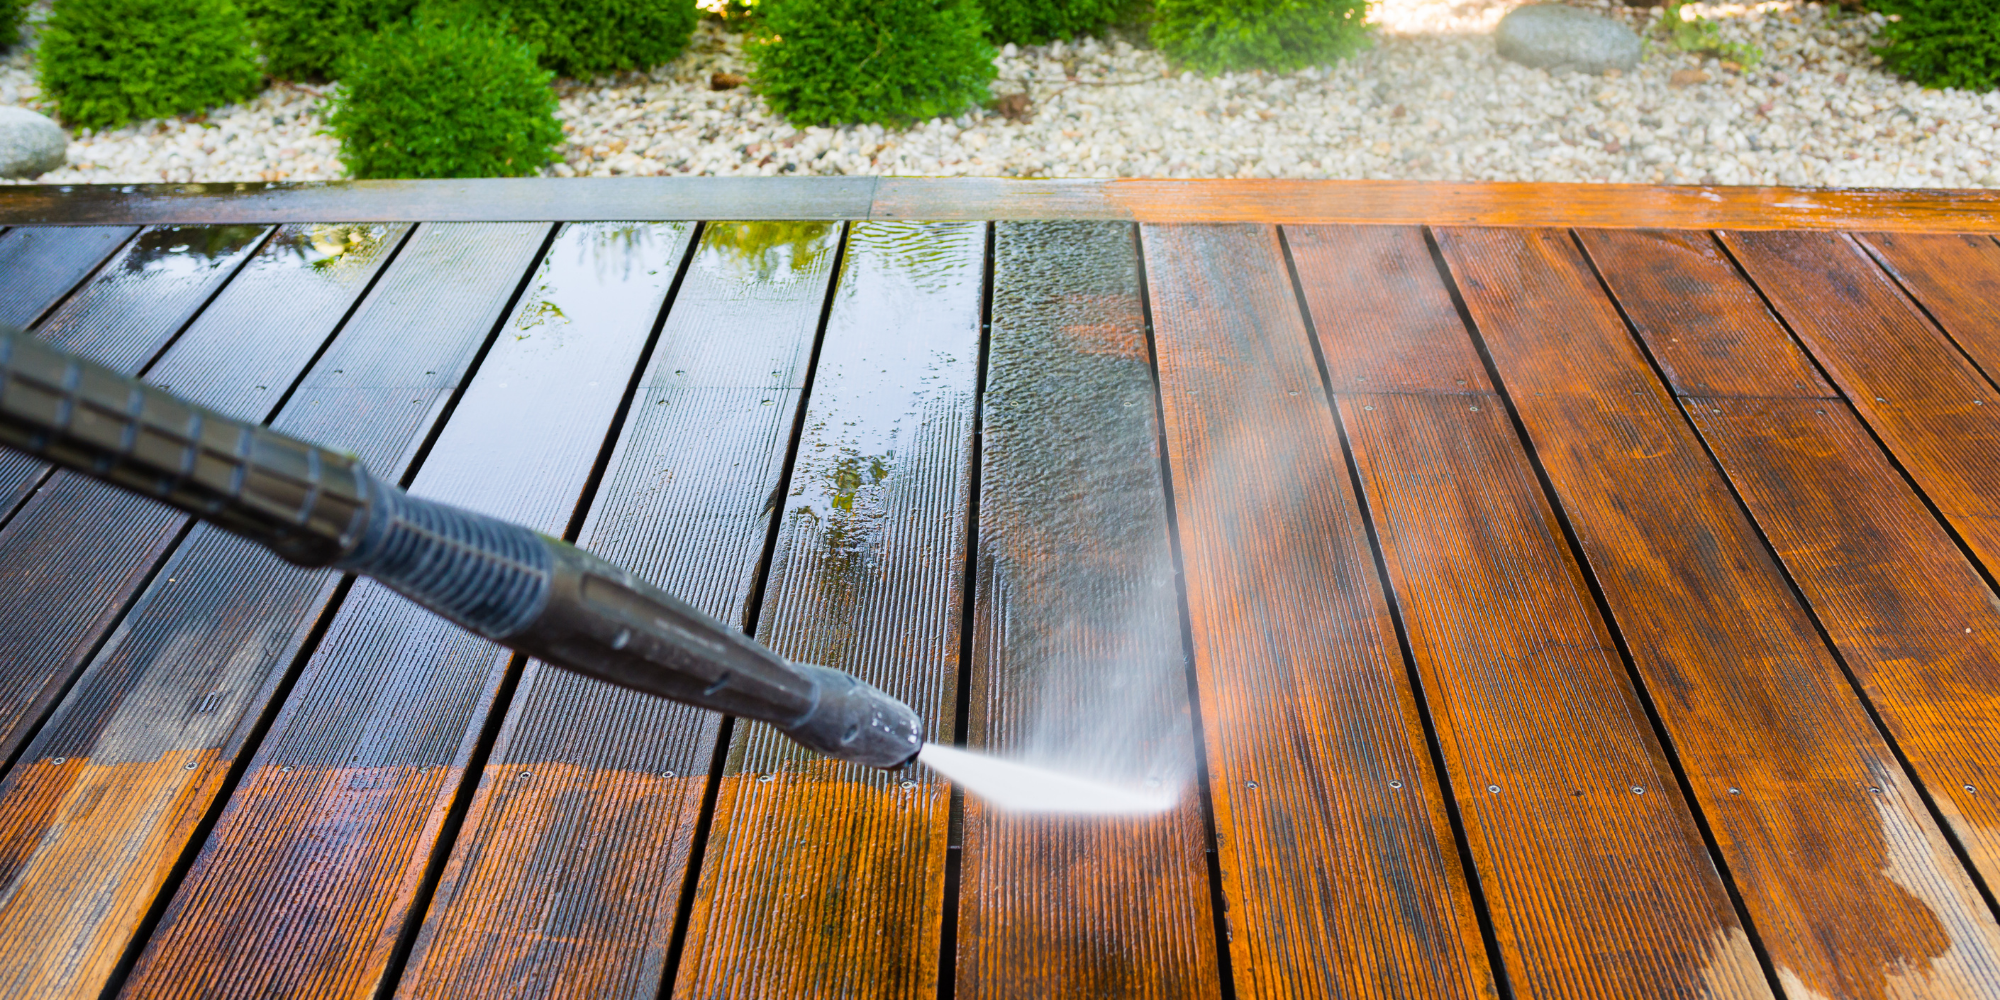 7 Tips for Using a Surface Cleaner with a Pressure Washer Safely and Effectively